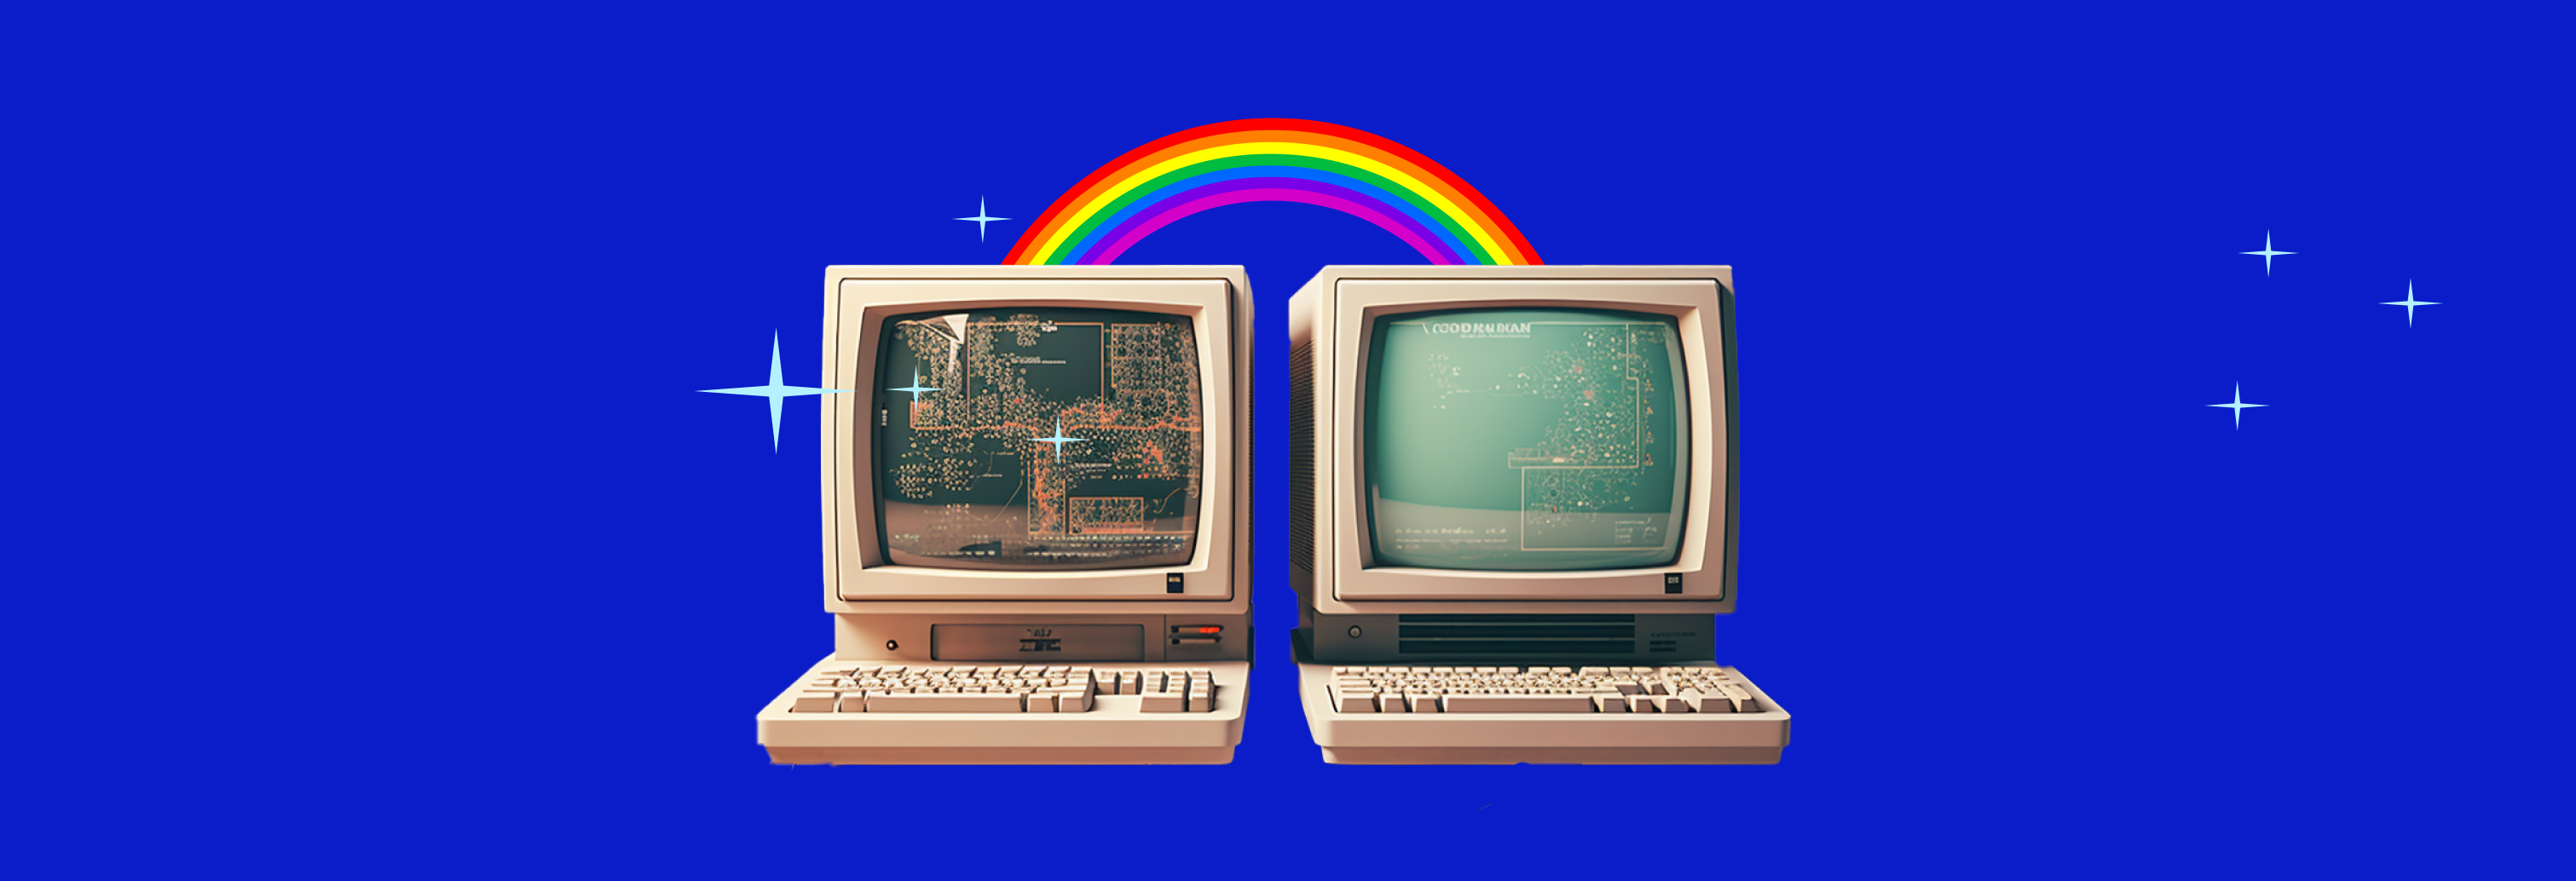 Image of two retro PCs with overlayed star and rainbow illustrations